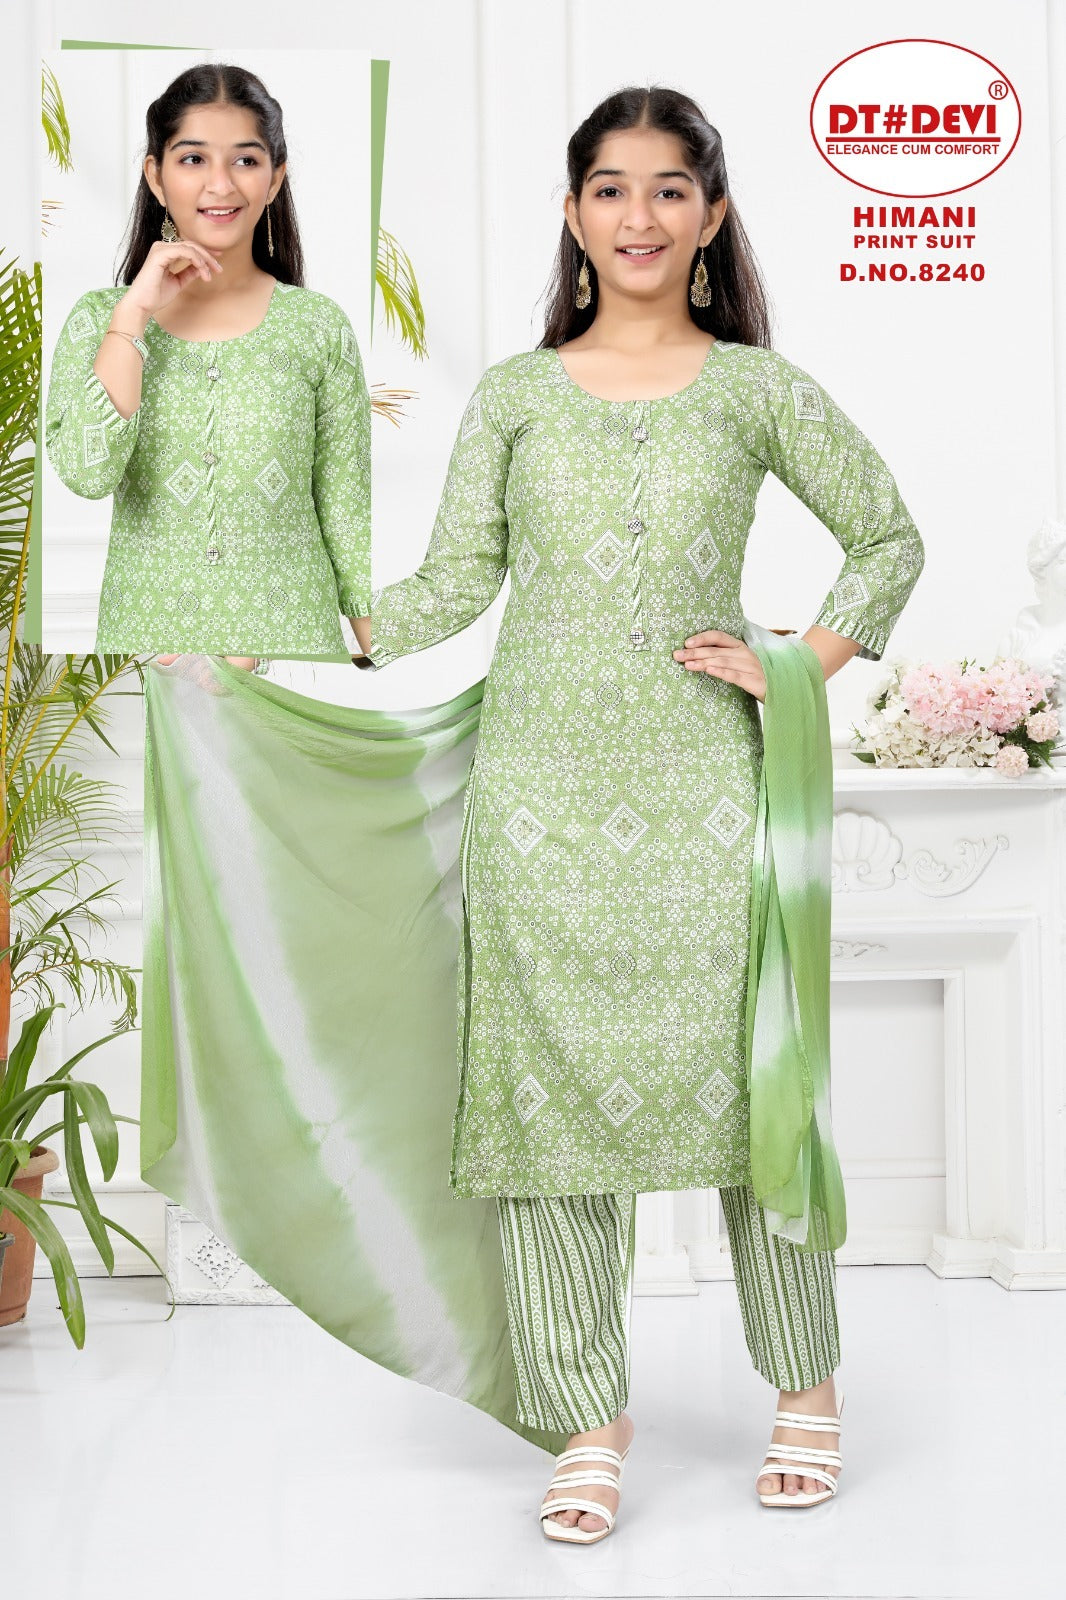 8240-Himani Dt Devi Rayon  Readymade Pant Style Suits